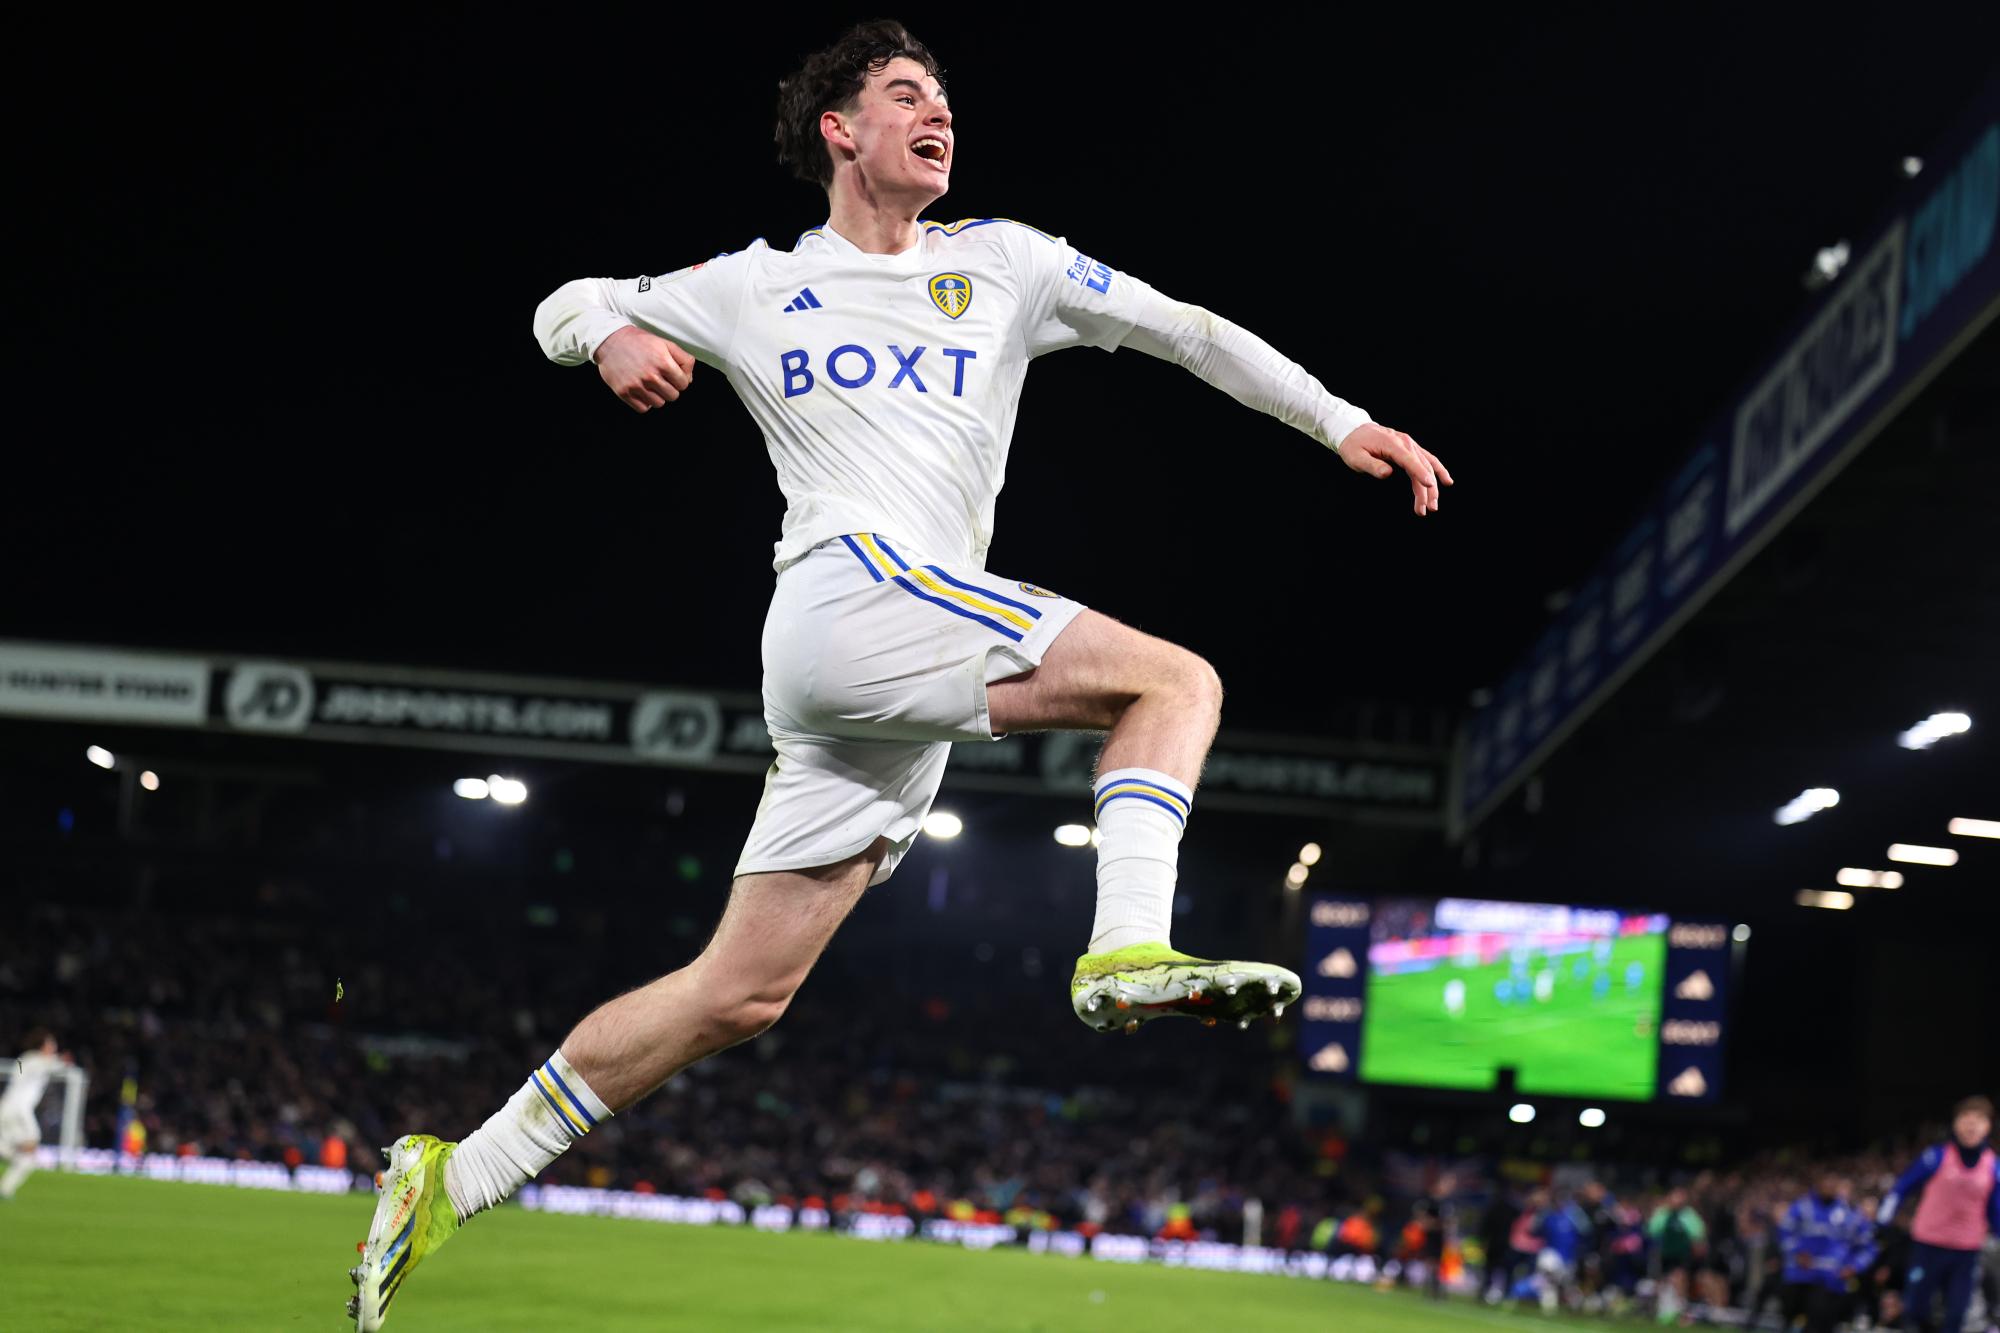 cup progress or promotion? leeds weigh up priorities for chelsea trip